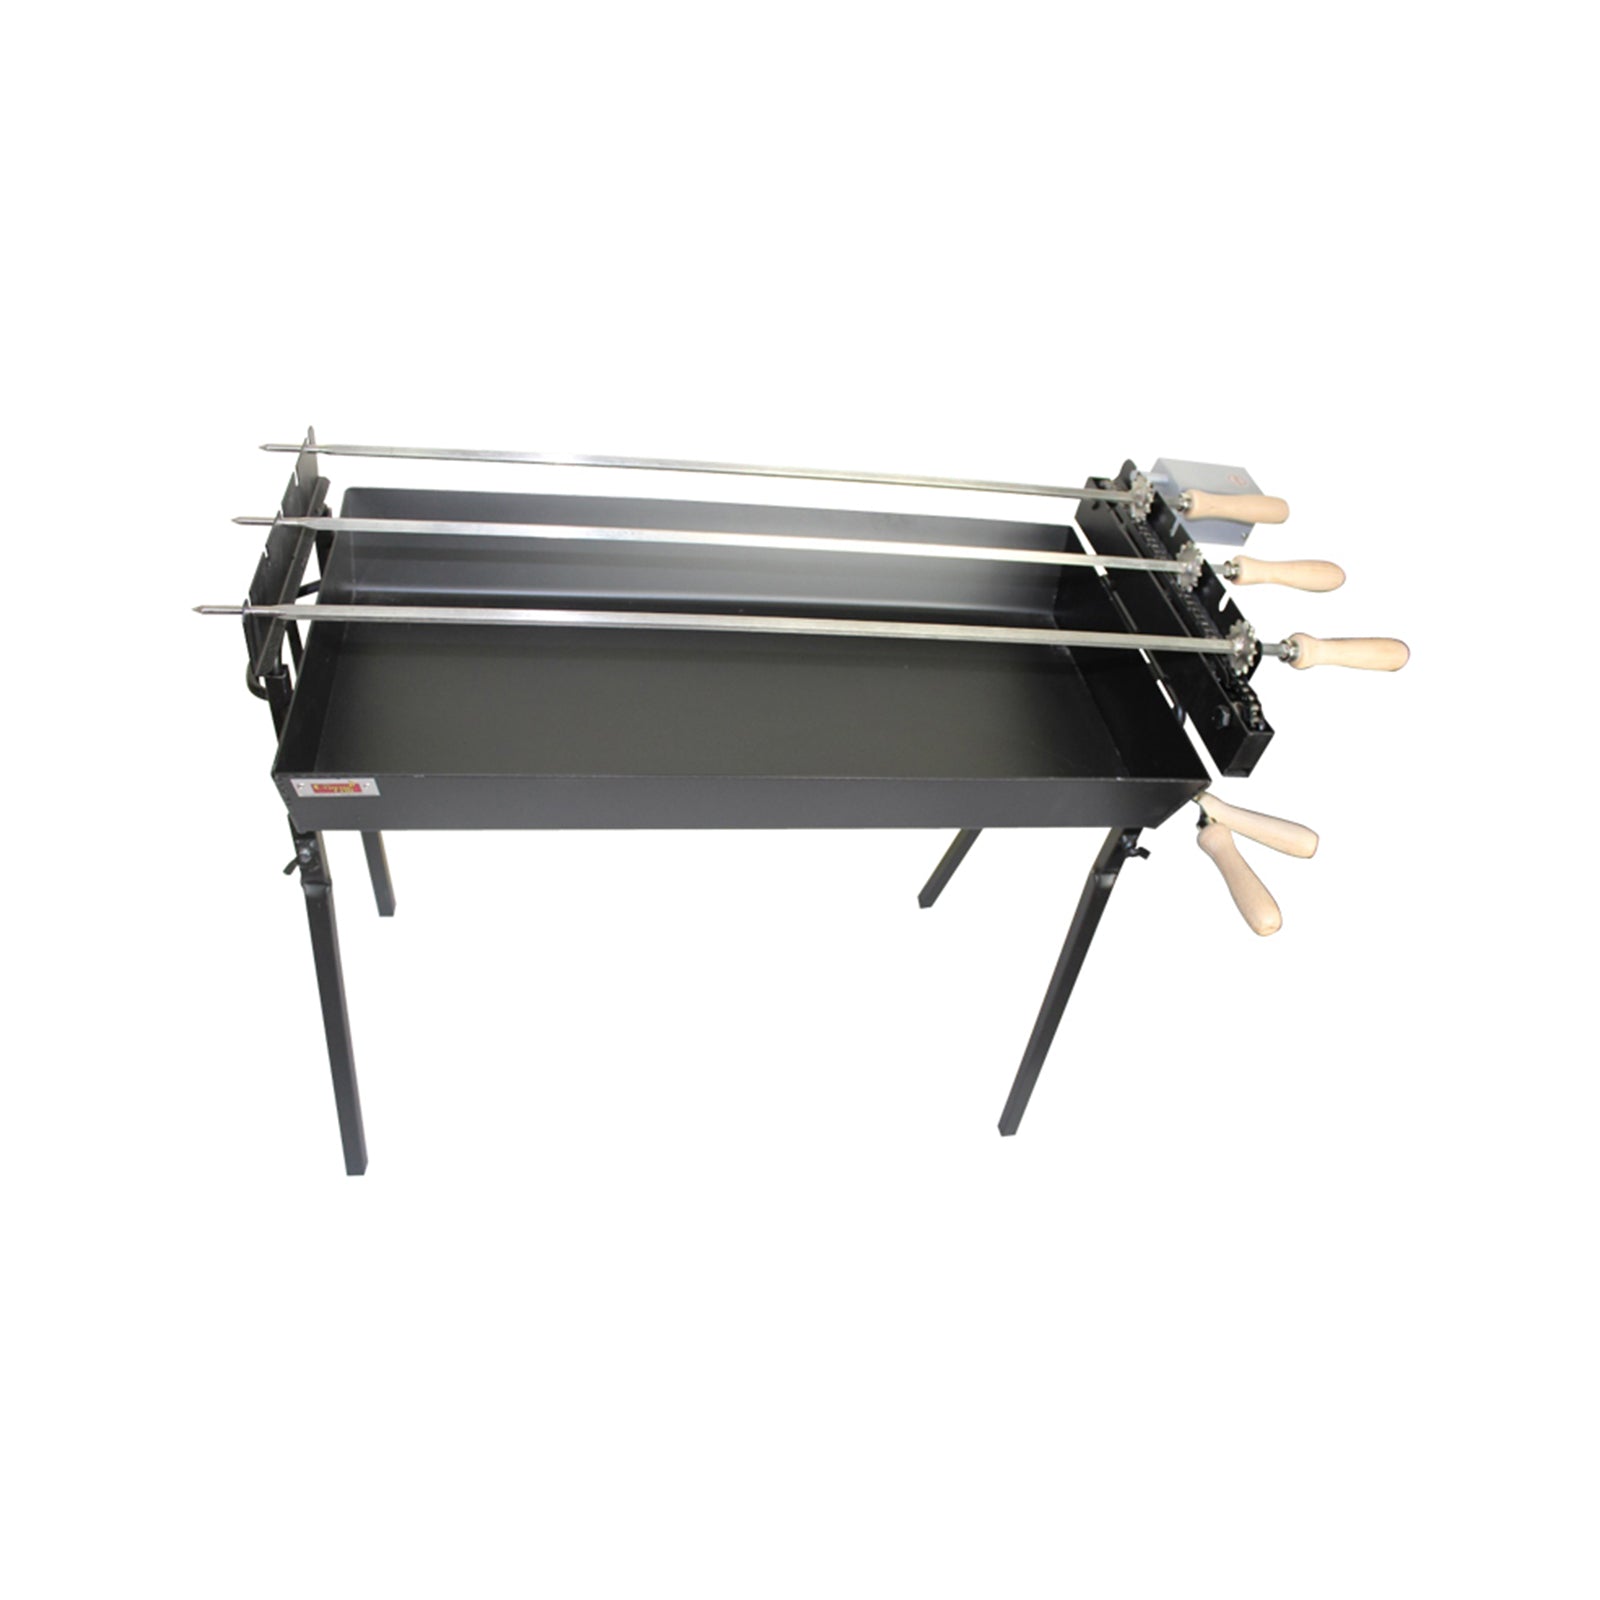 Special Edition Cyprus Grill Modern Rotisserie Spit with 20kg Variable speed Motor - CG-0779V